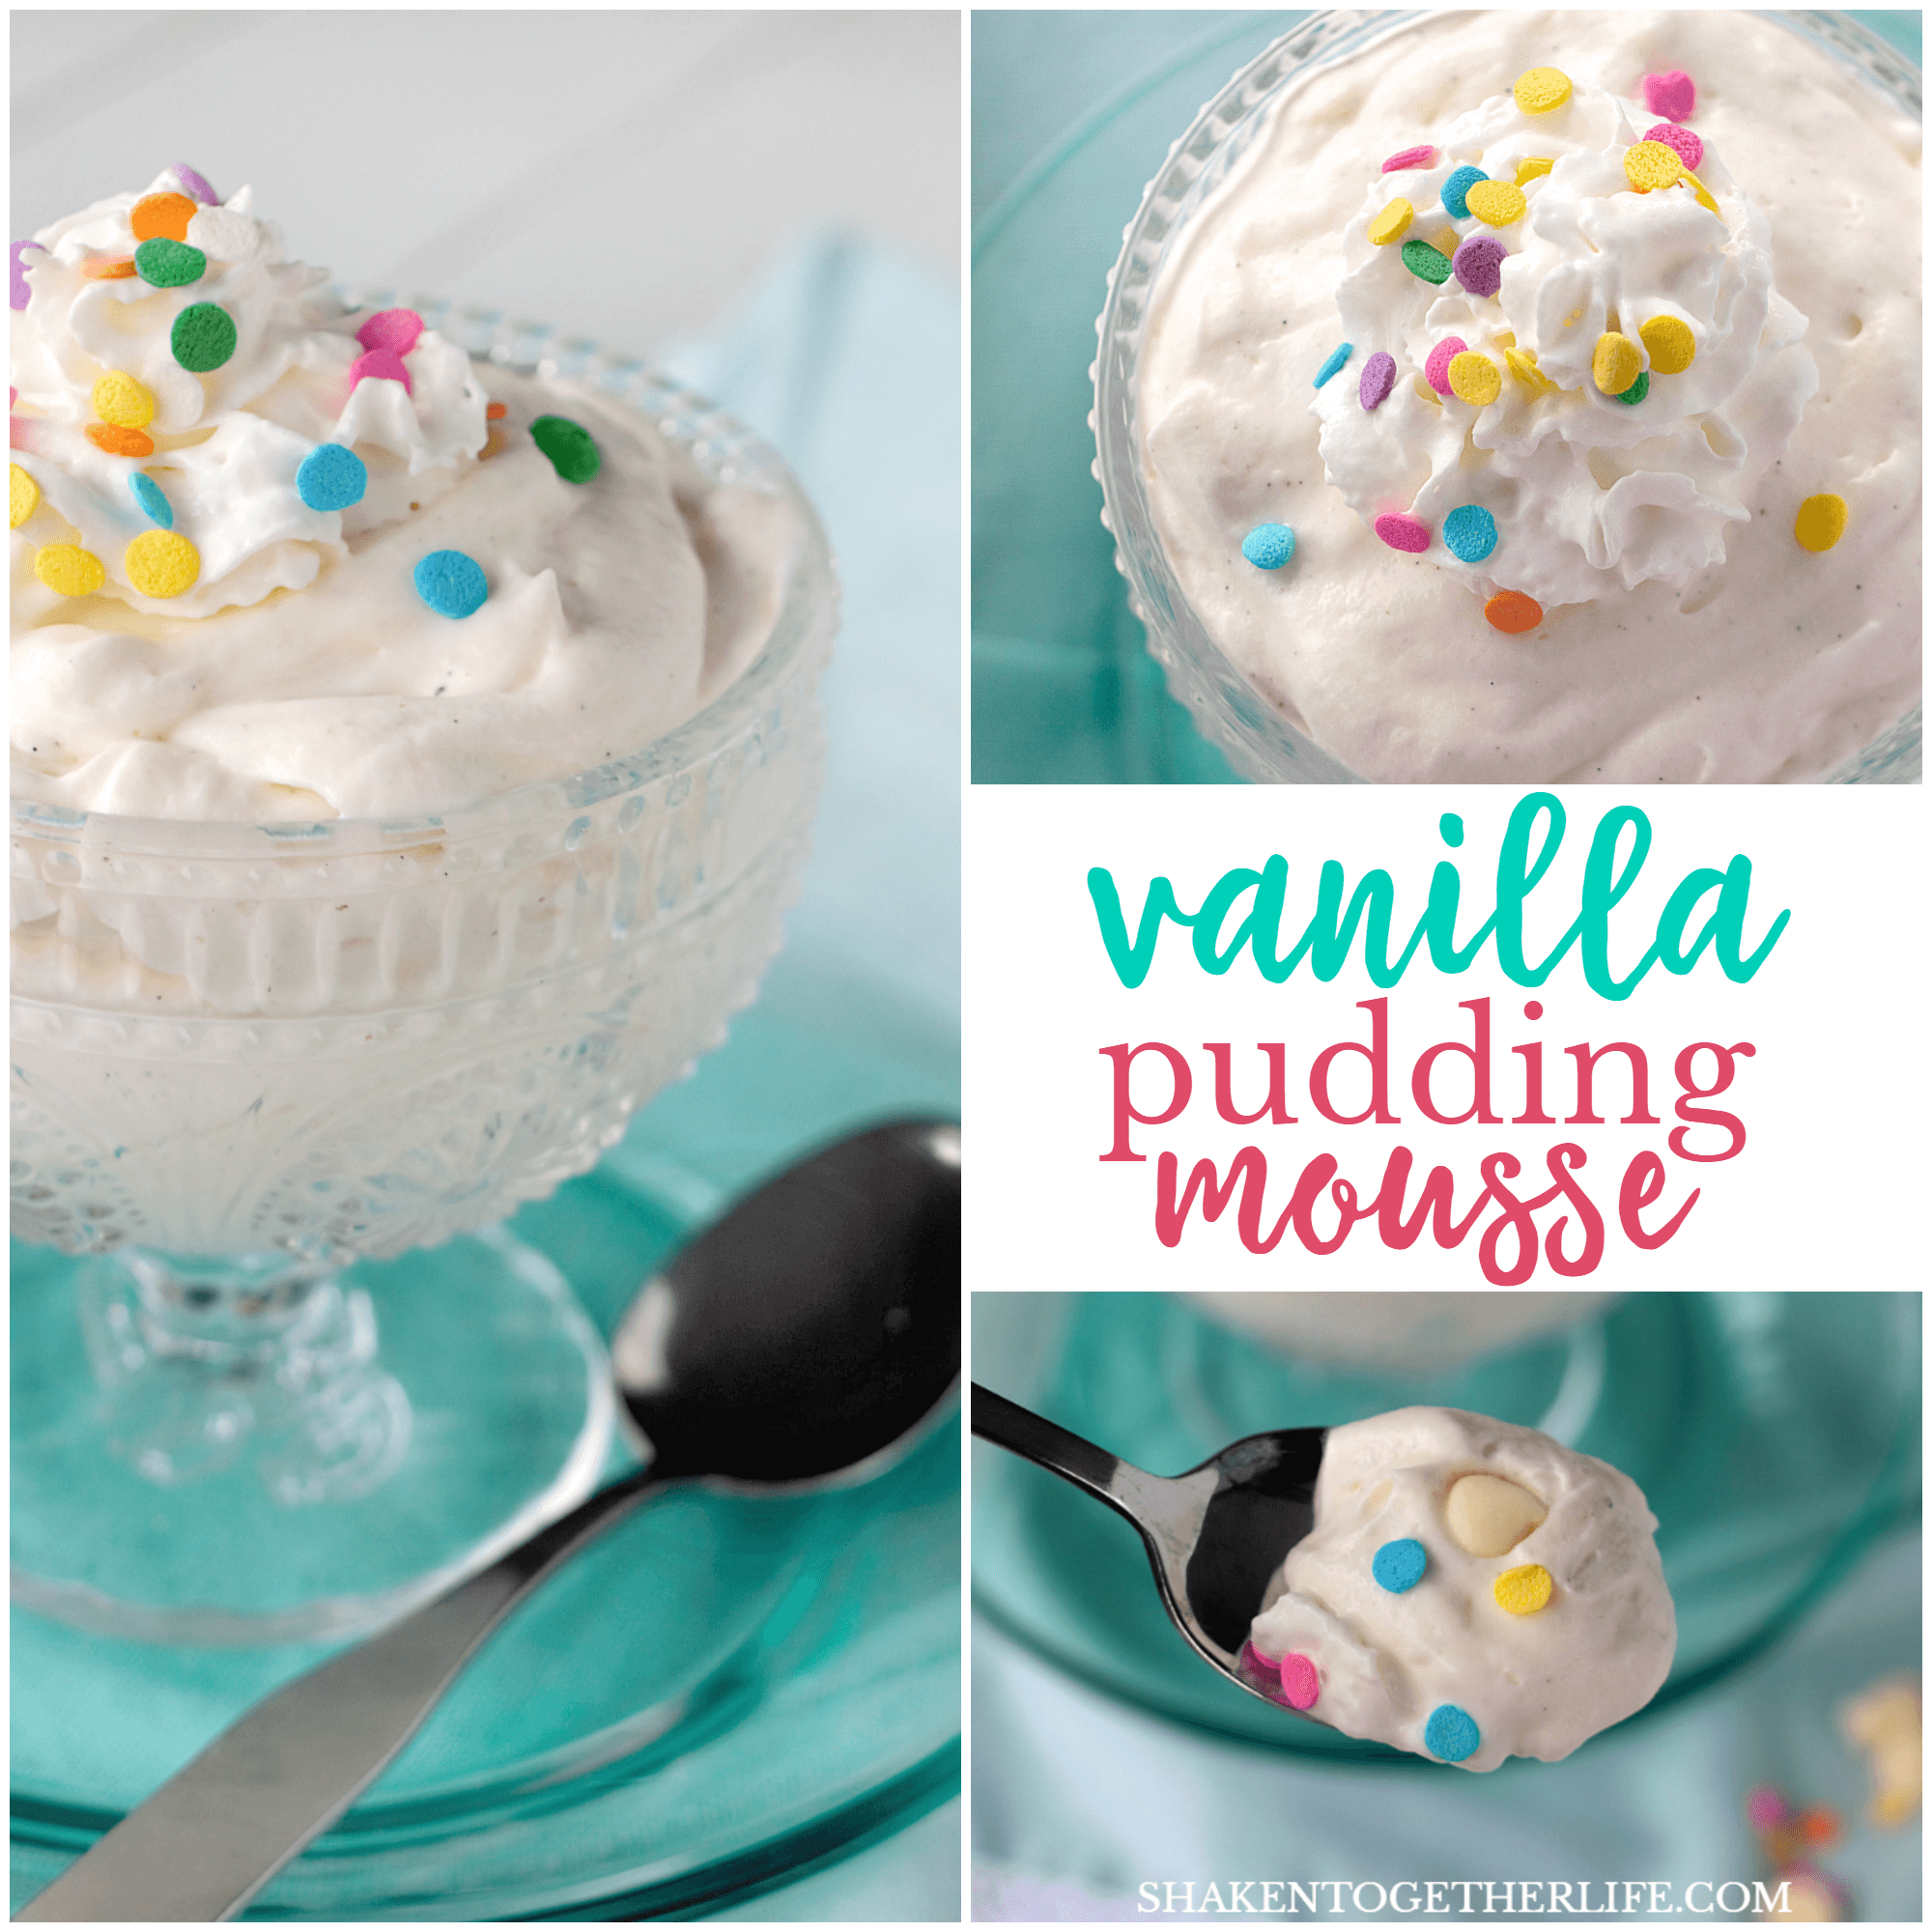 Creamy and fluffy, this Very Vanilla Pudding Mousse is a super simple no bake dessert with BIG vanilla flavor!